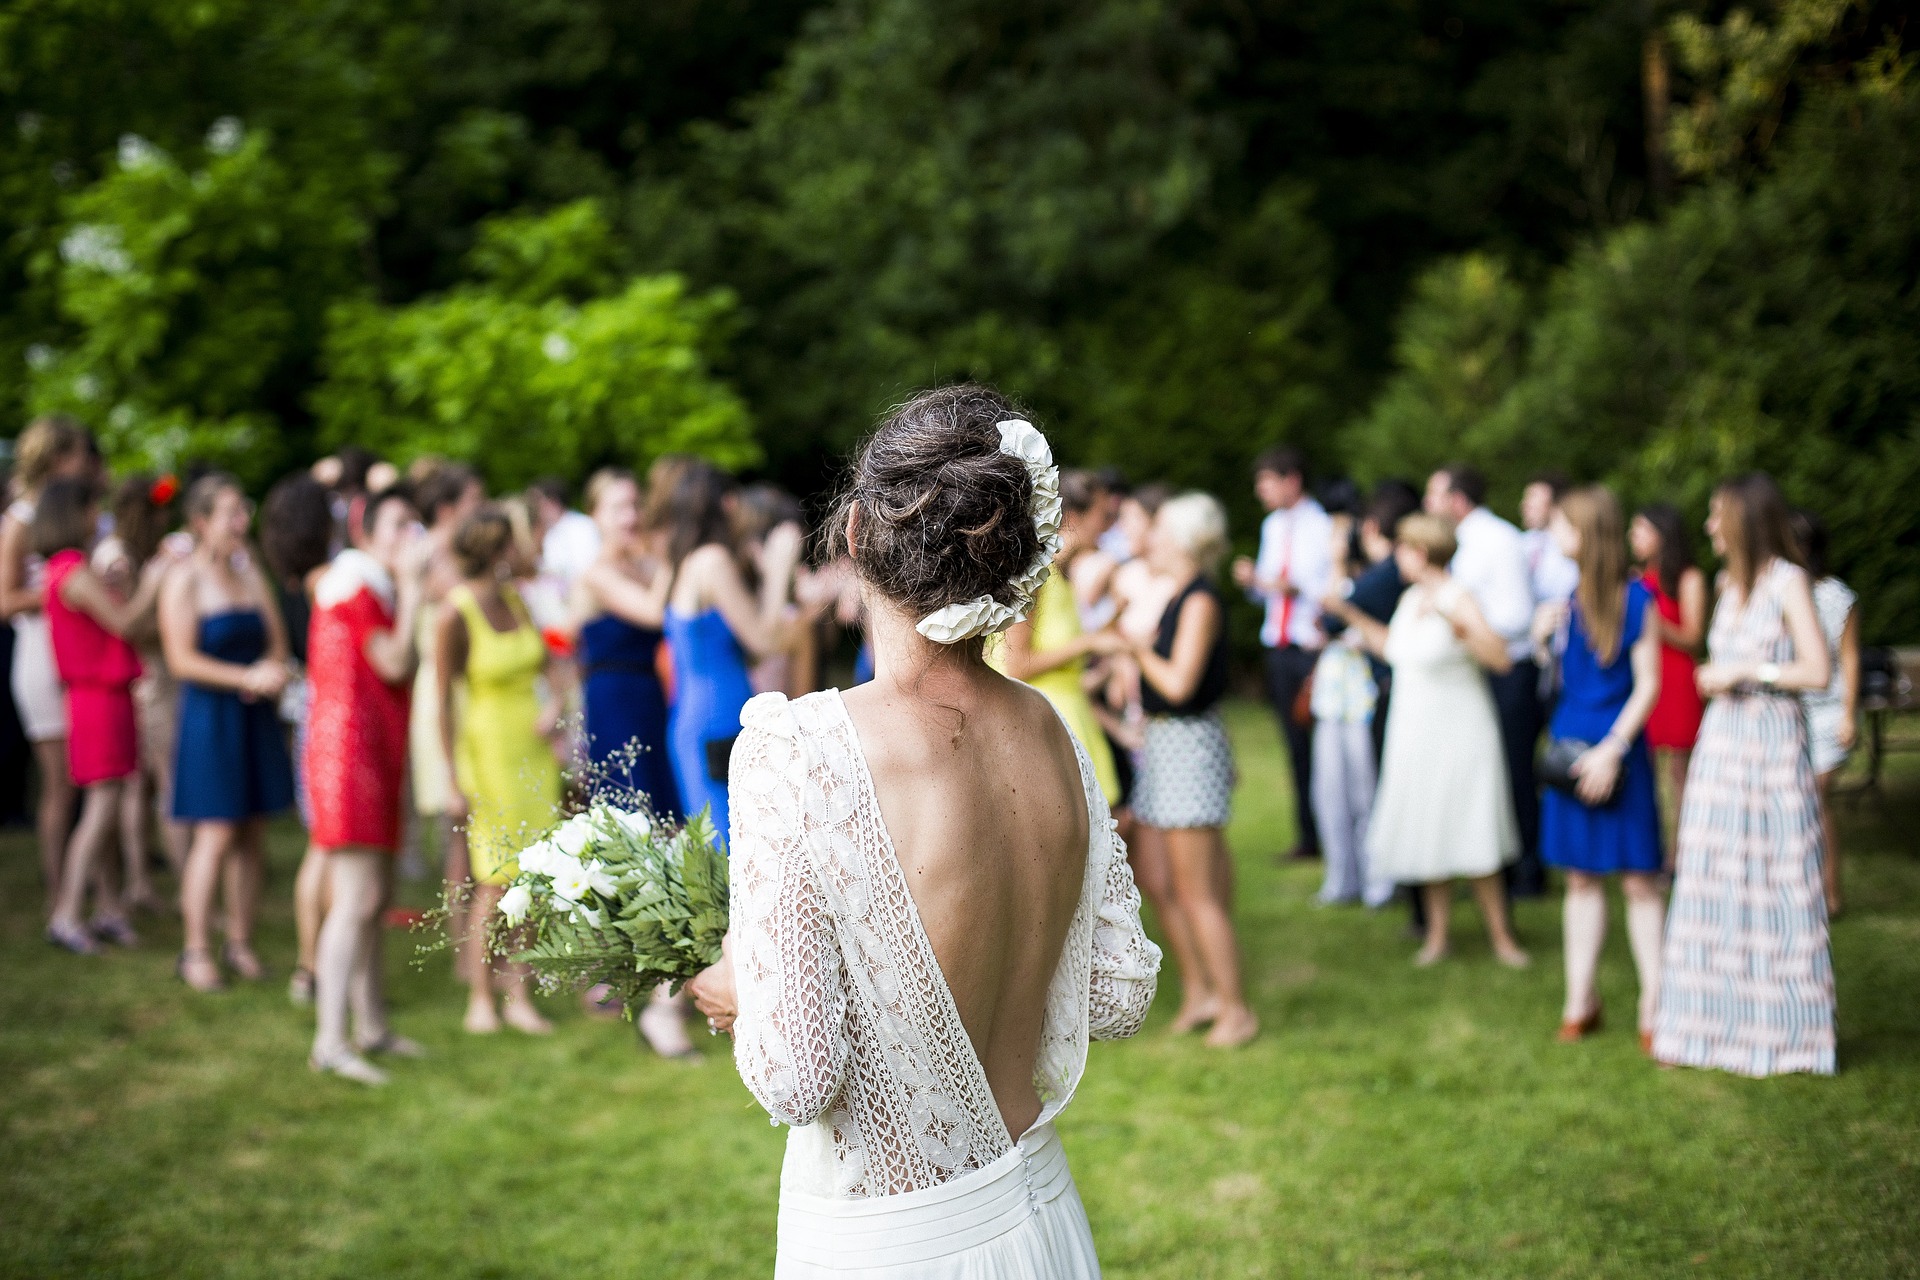 A woman prepares to throw the bridal bouquet at an outdoor event venue.